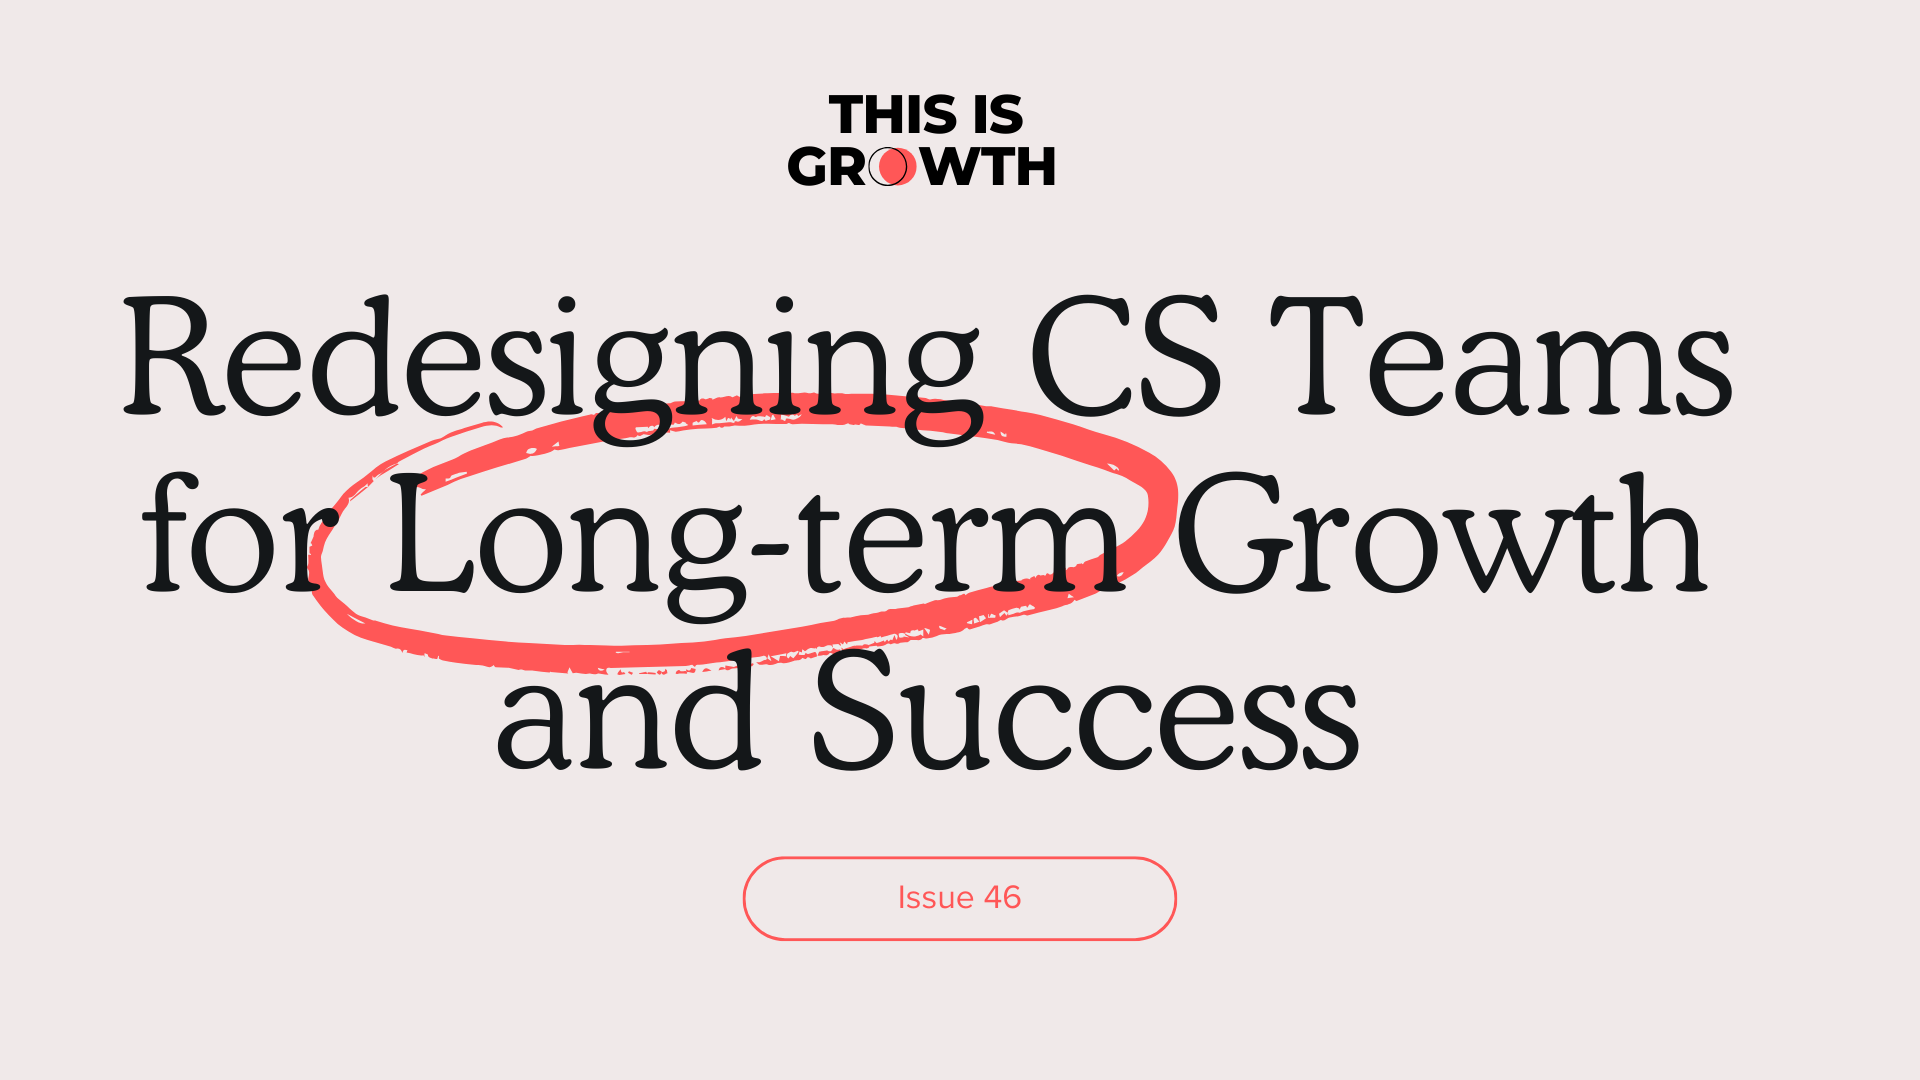 Redesigning CS Teams for Long-term Growth and Success